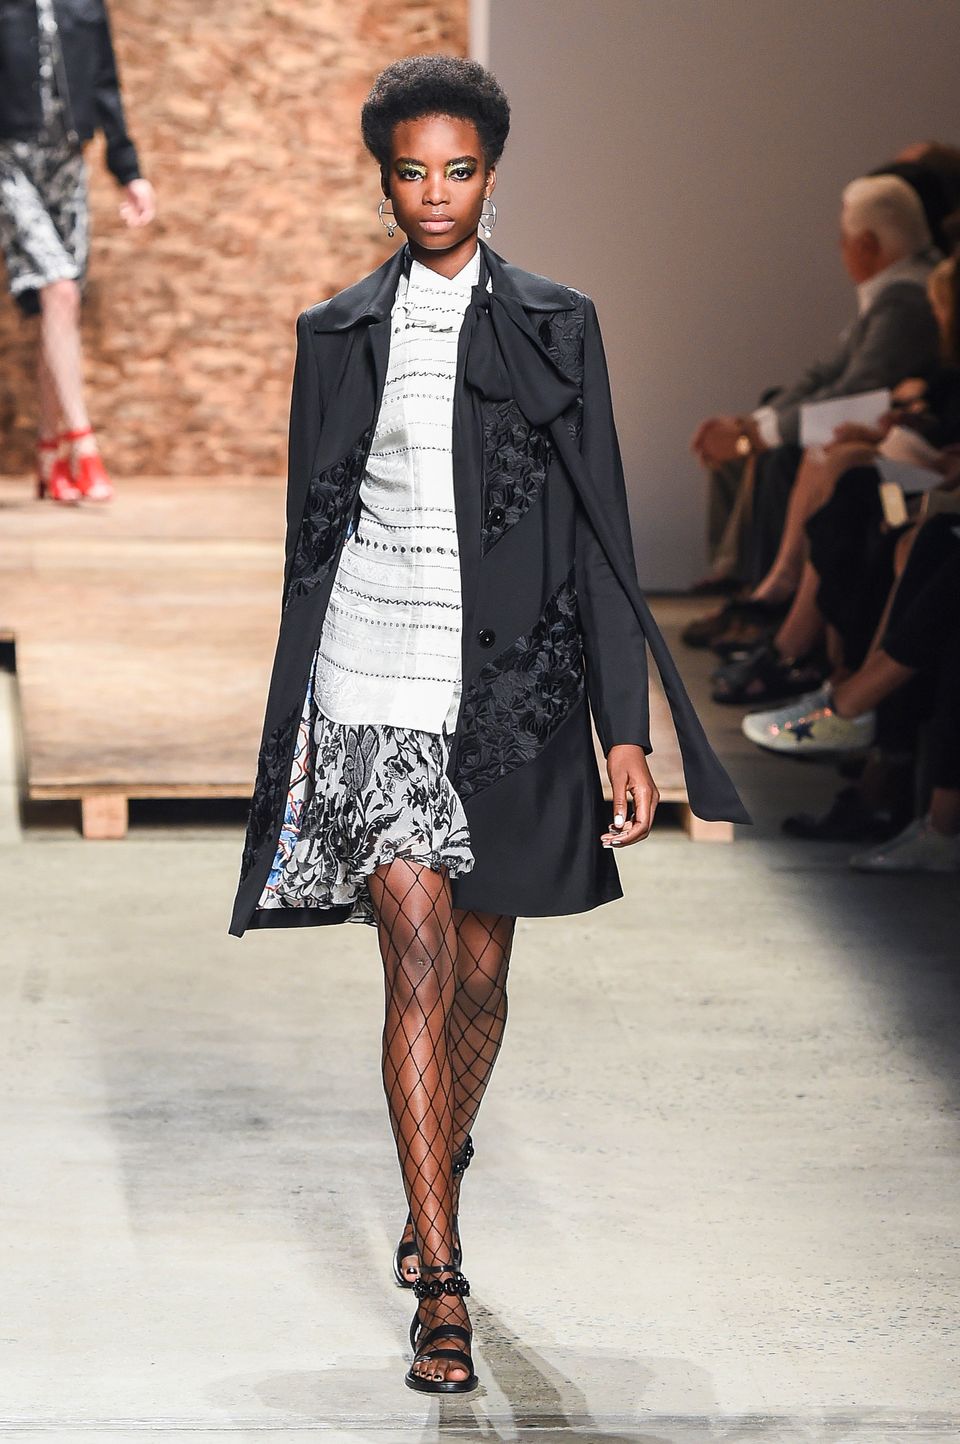 Maria Borges in Creatures of the Wind's Spring 2016 Show